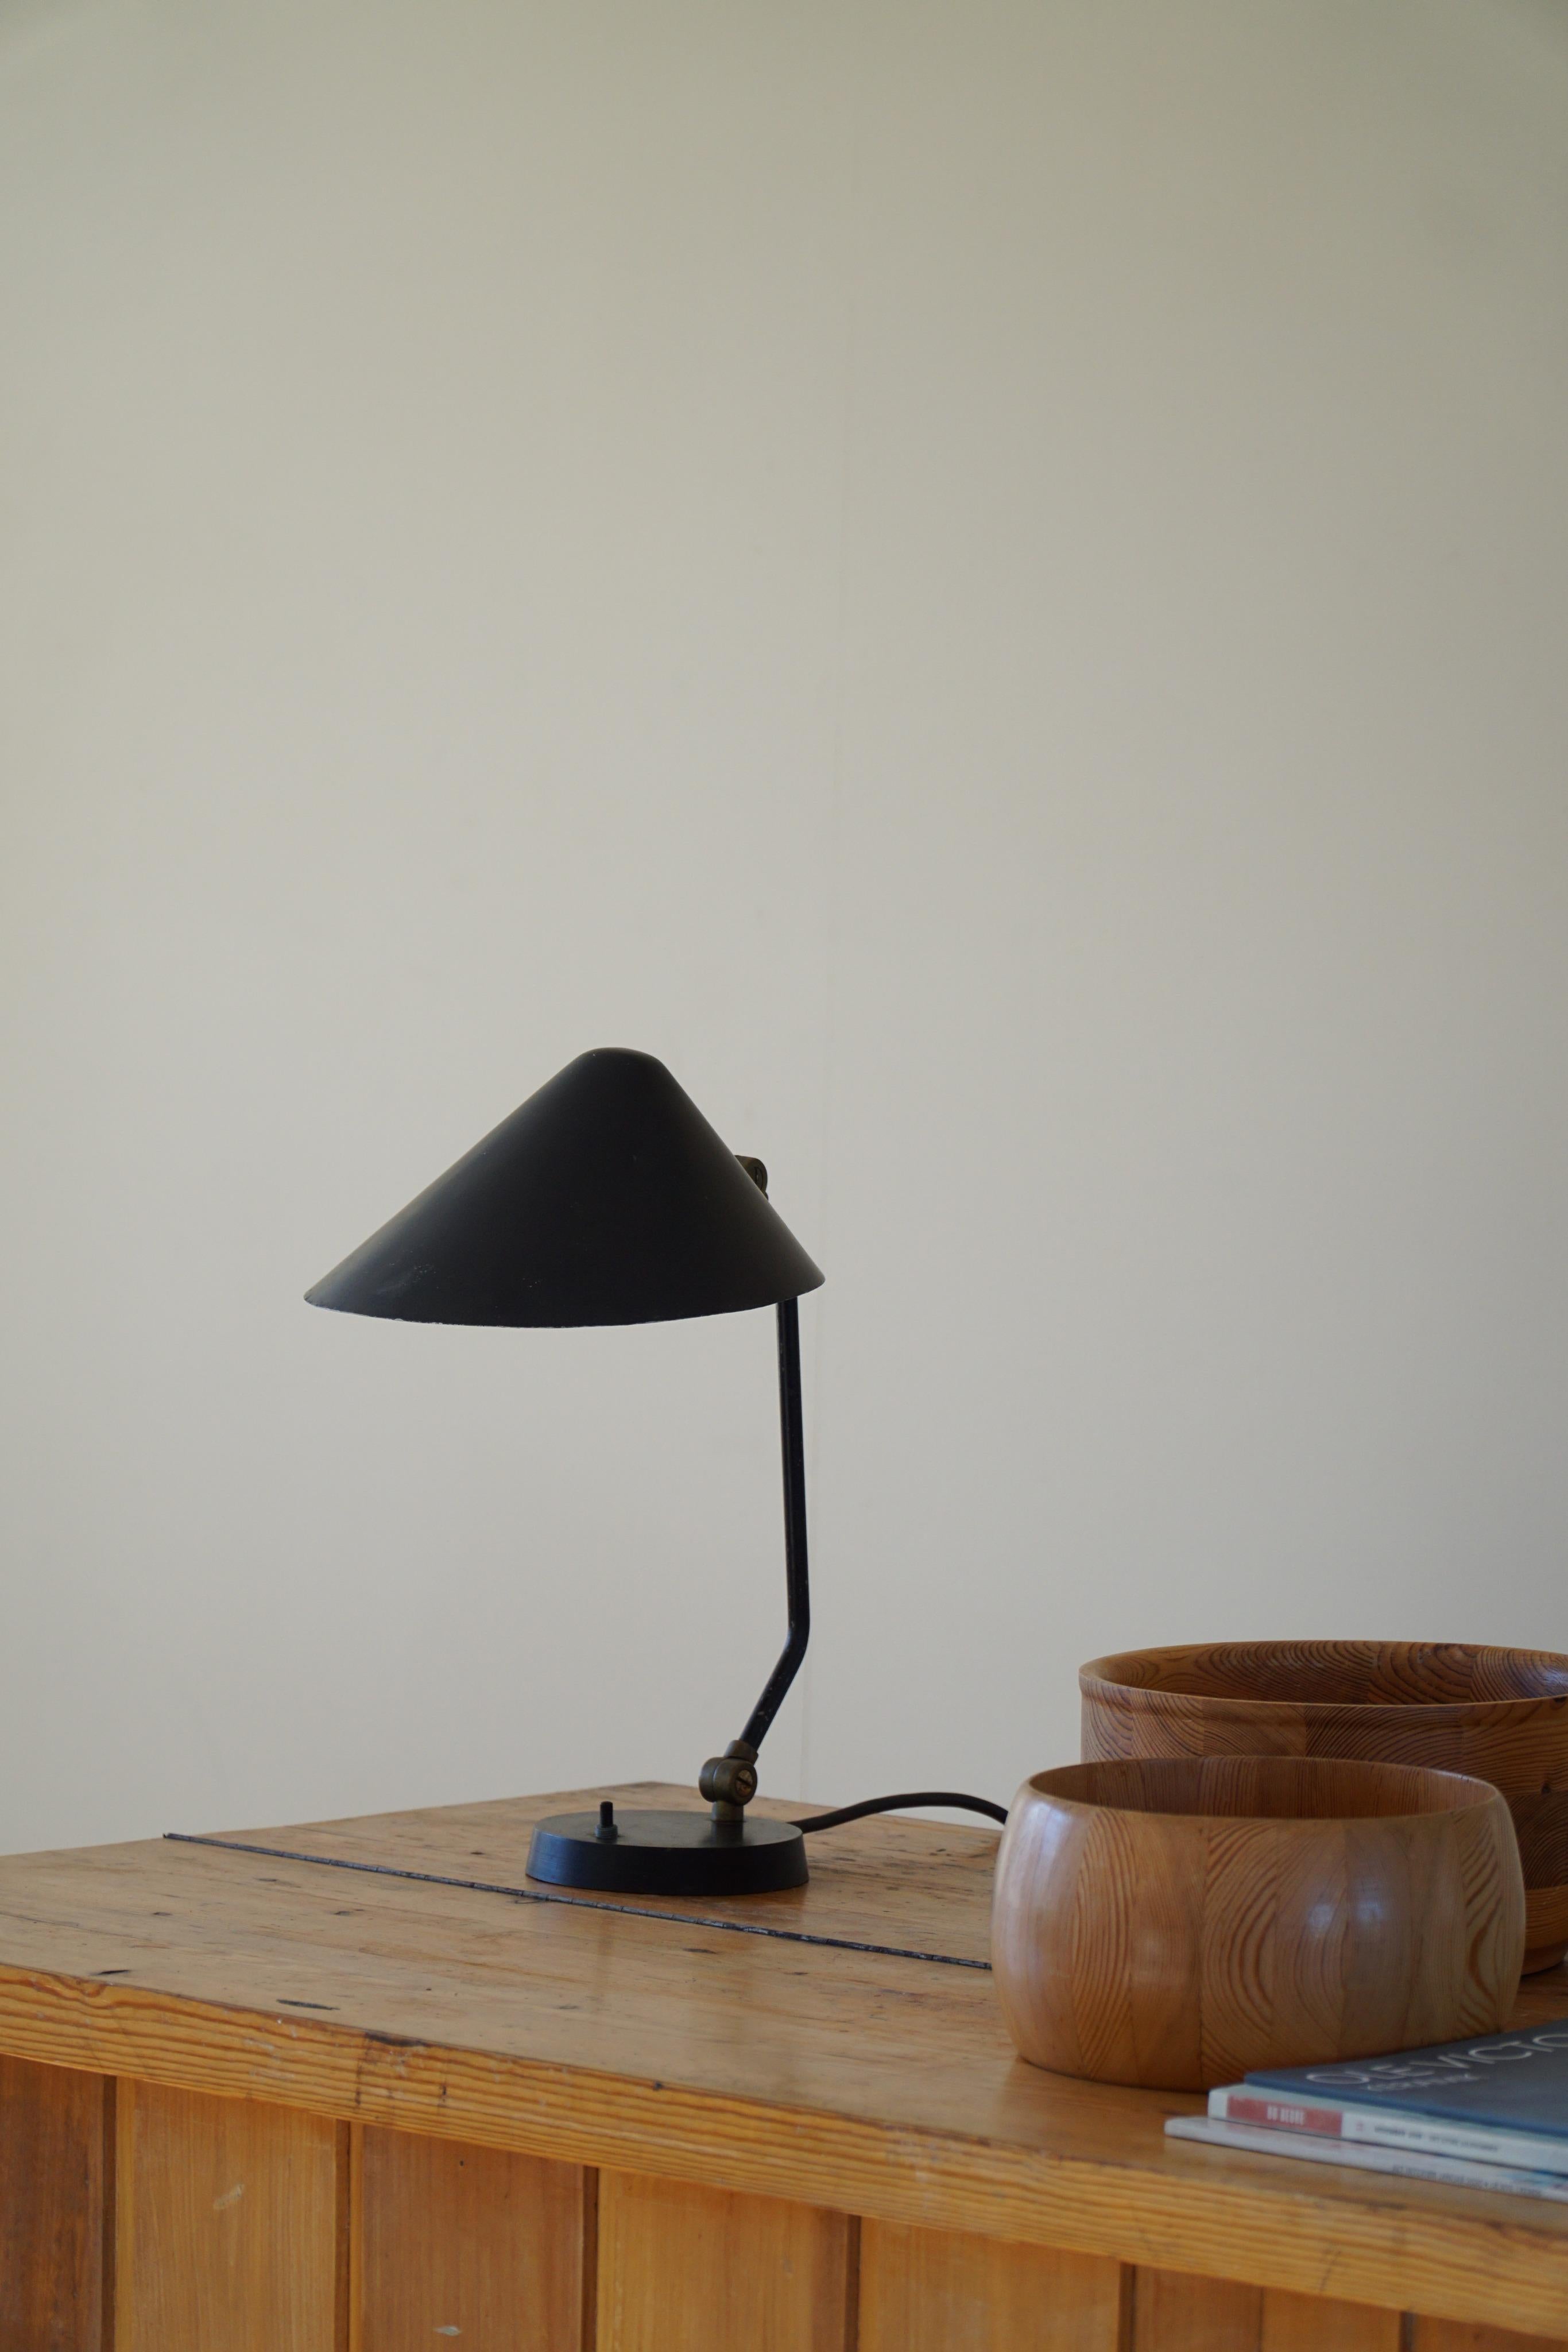 Rare and elegant adjustable table lamp in black lacquered metal from the 1950s. Made by the Danish company Louis Poulsen. 
The light can be directly pointed at a subject as well as turned against a wall for more soft light. 

Some traces of